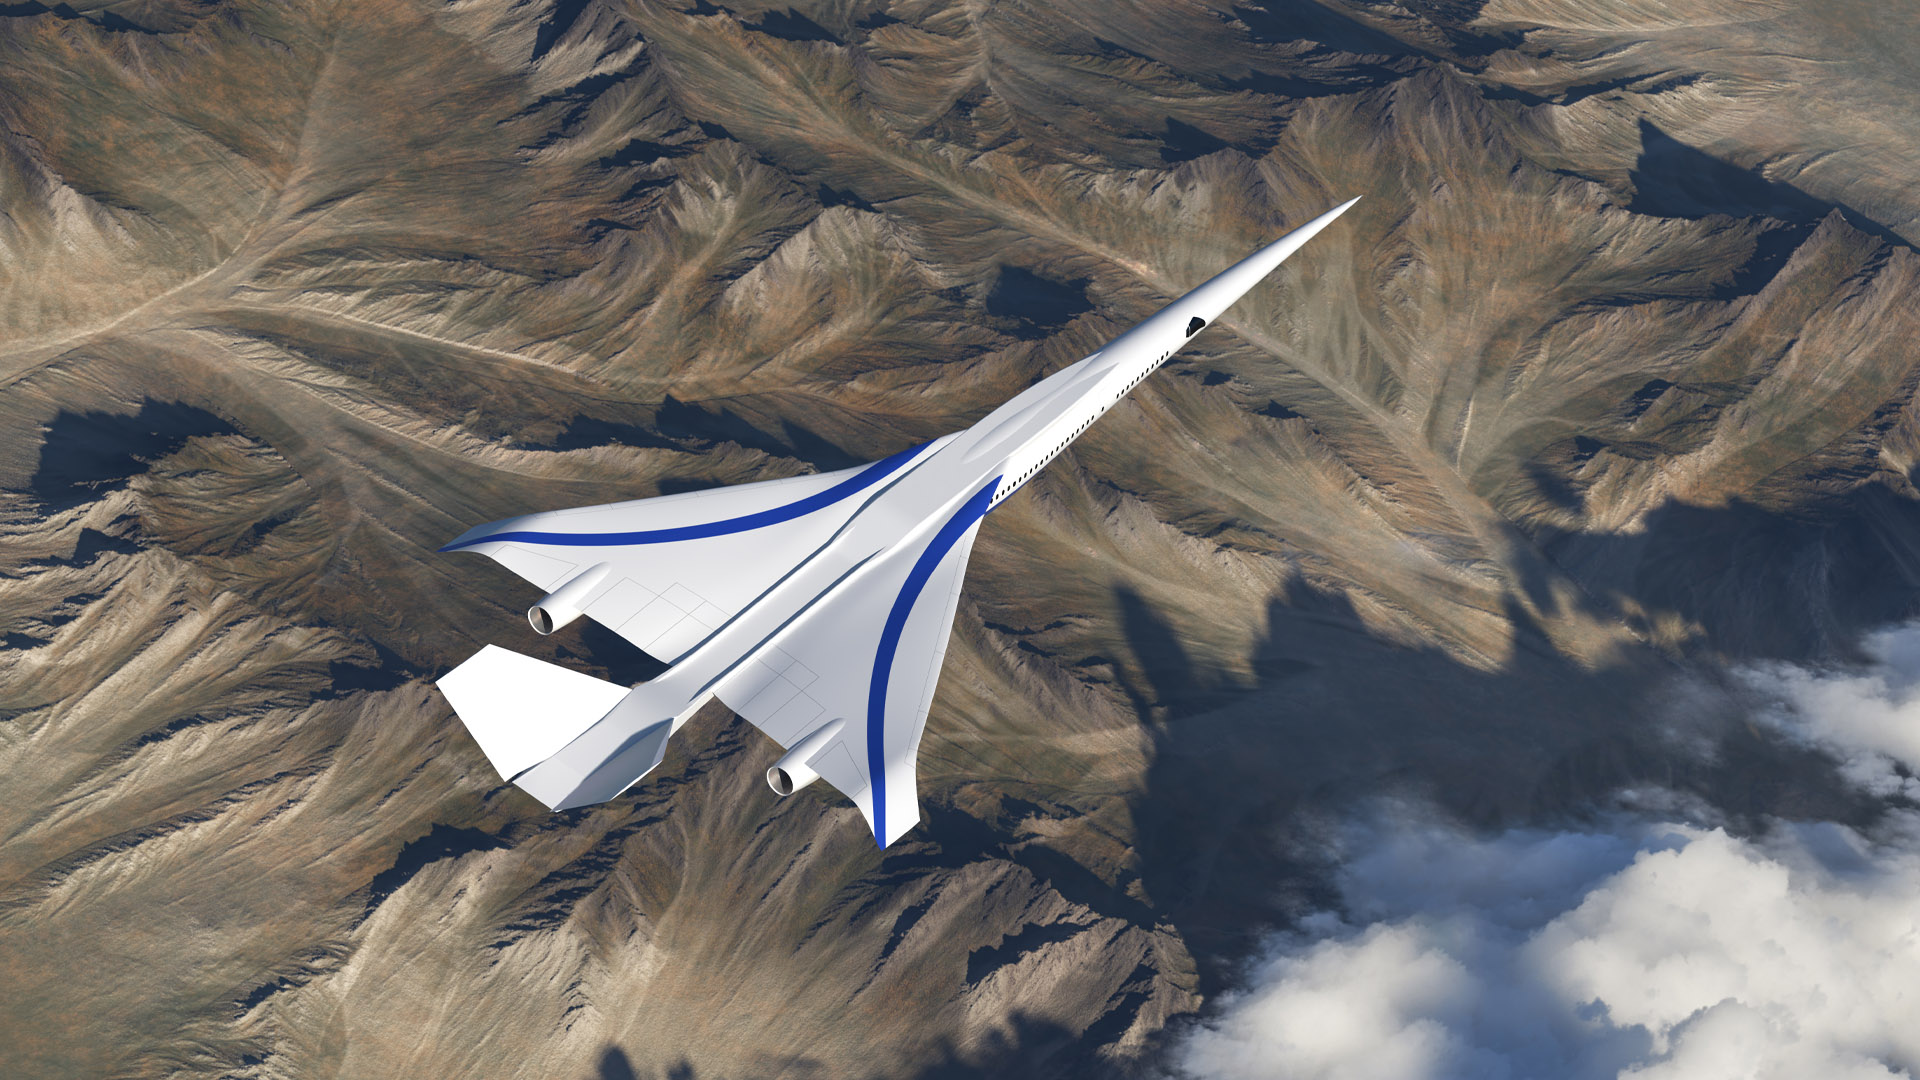 Exosonic Completes Quiet Supersonic Airliner Conceptual Review; Closes $4M+ Seed Round